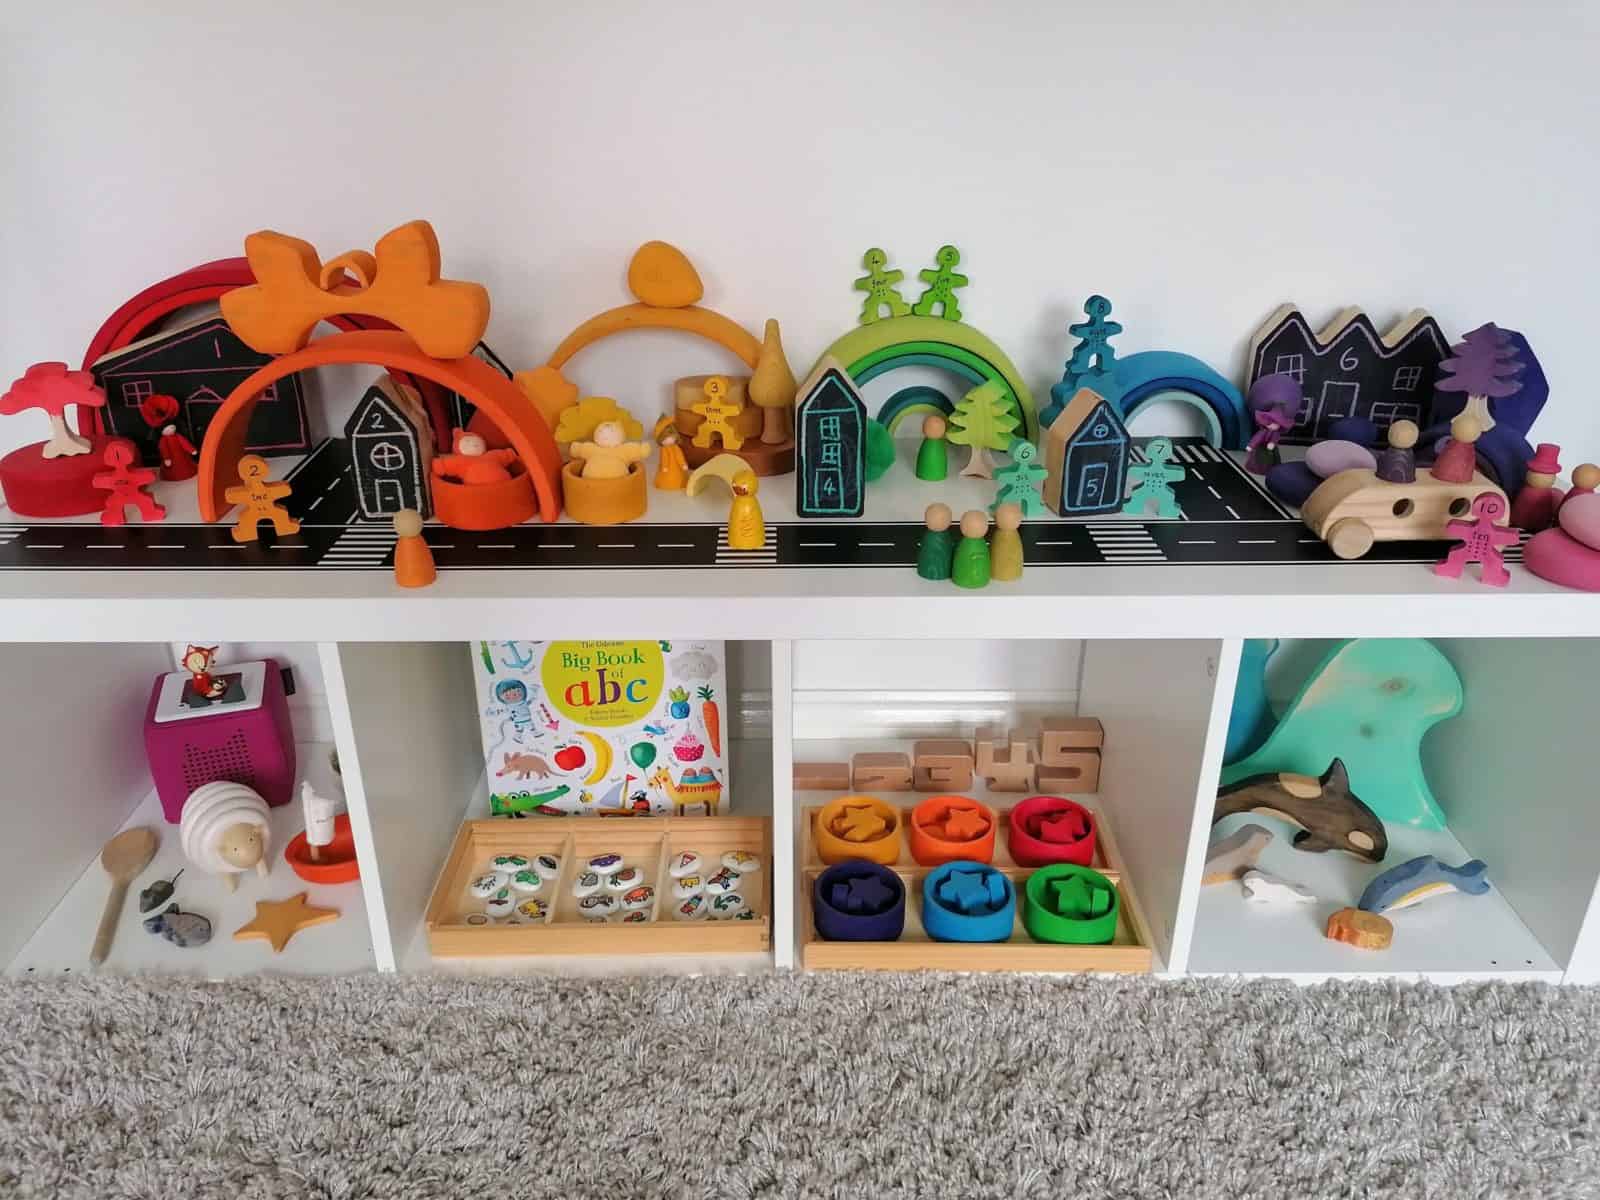 Toy Shelfie - Toy rotation - toy organisation - toy organization - top toys 2 year old and 3 year old - perpetual calendar - loose parts - open ended toys - traditional tales - three little pigs - waldorf inspired